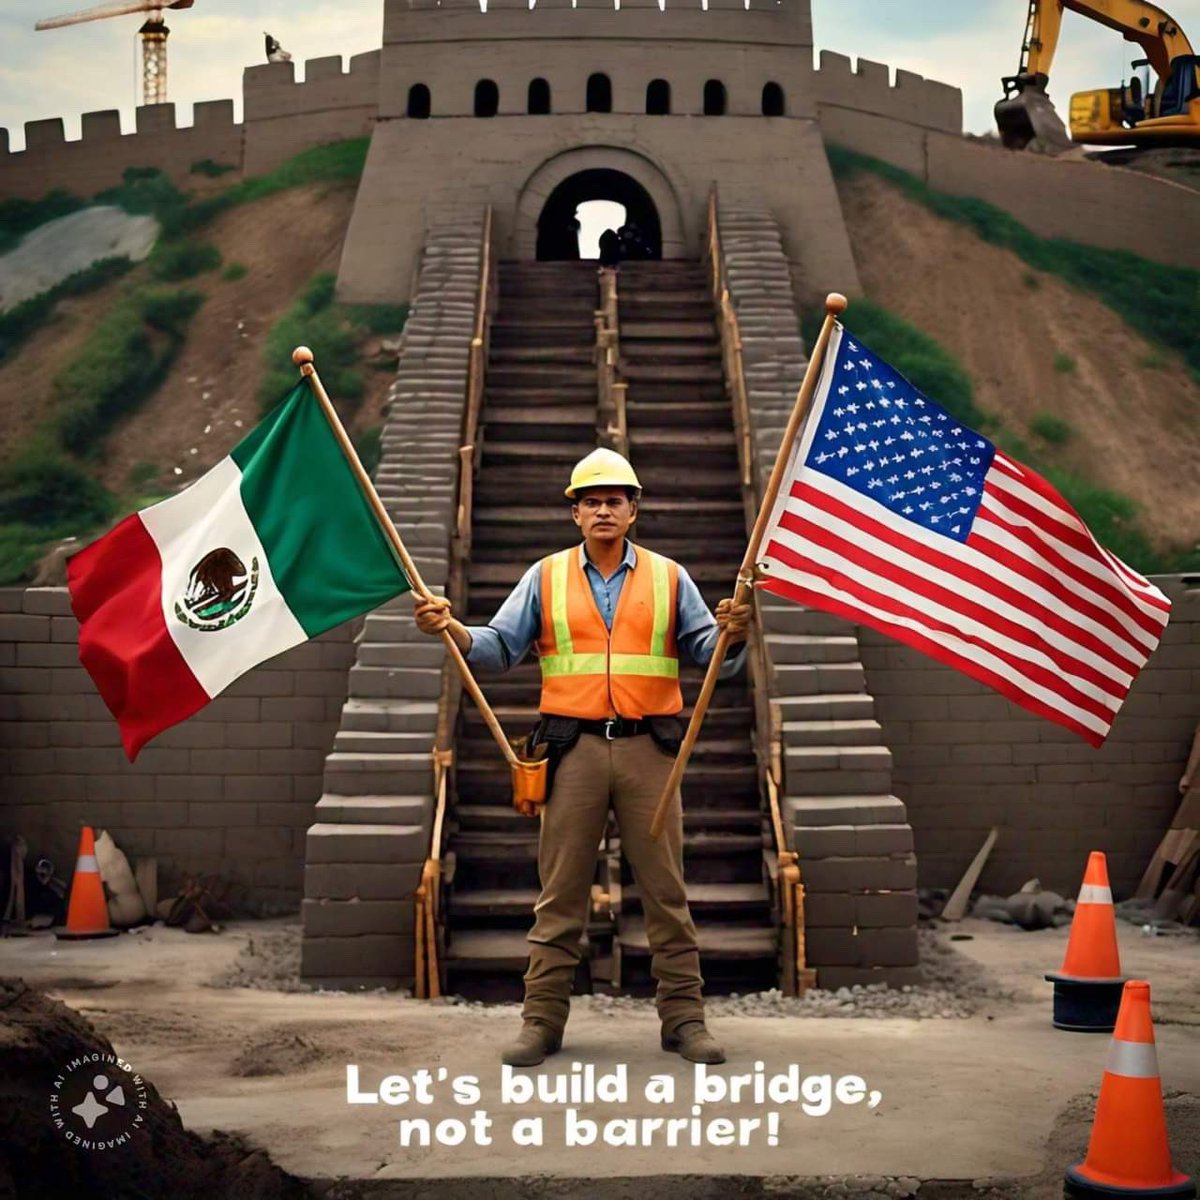 Let's build a bridge, not a barrier! Support the Great Wall project on the southern border, creating jobs, reducing poverty, and fostering economic growth & cultural exchange between the US & Mexico! #GreatWallProject #BuildBridgesNotWalls